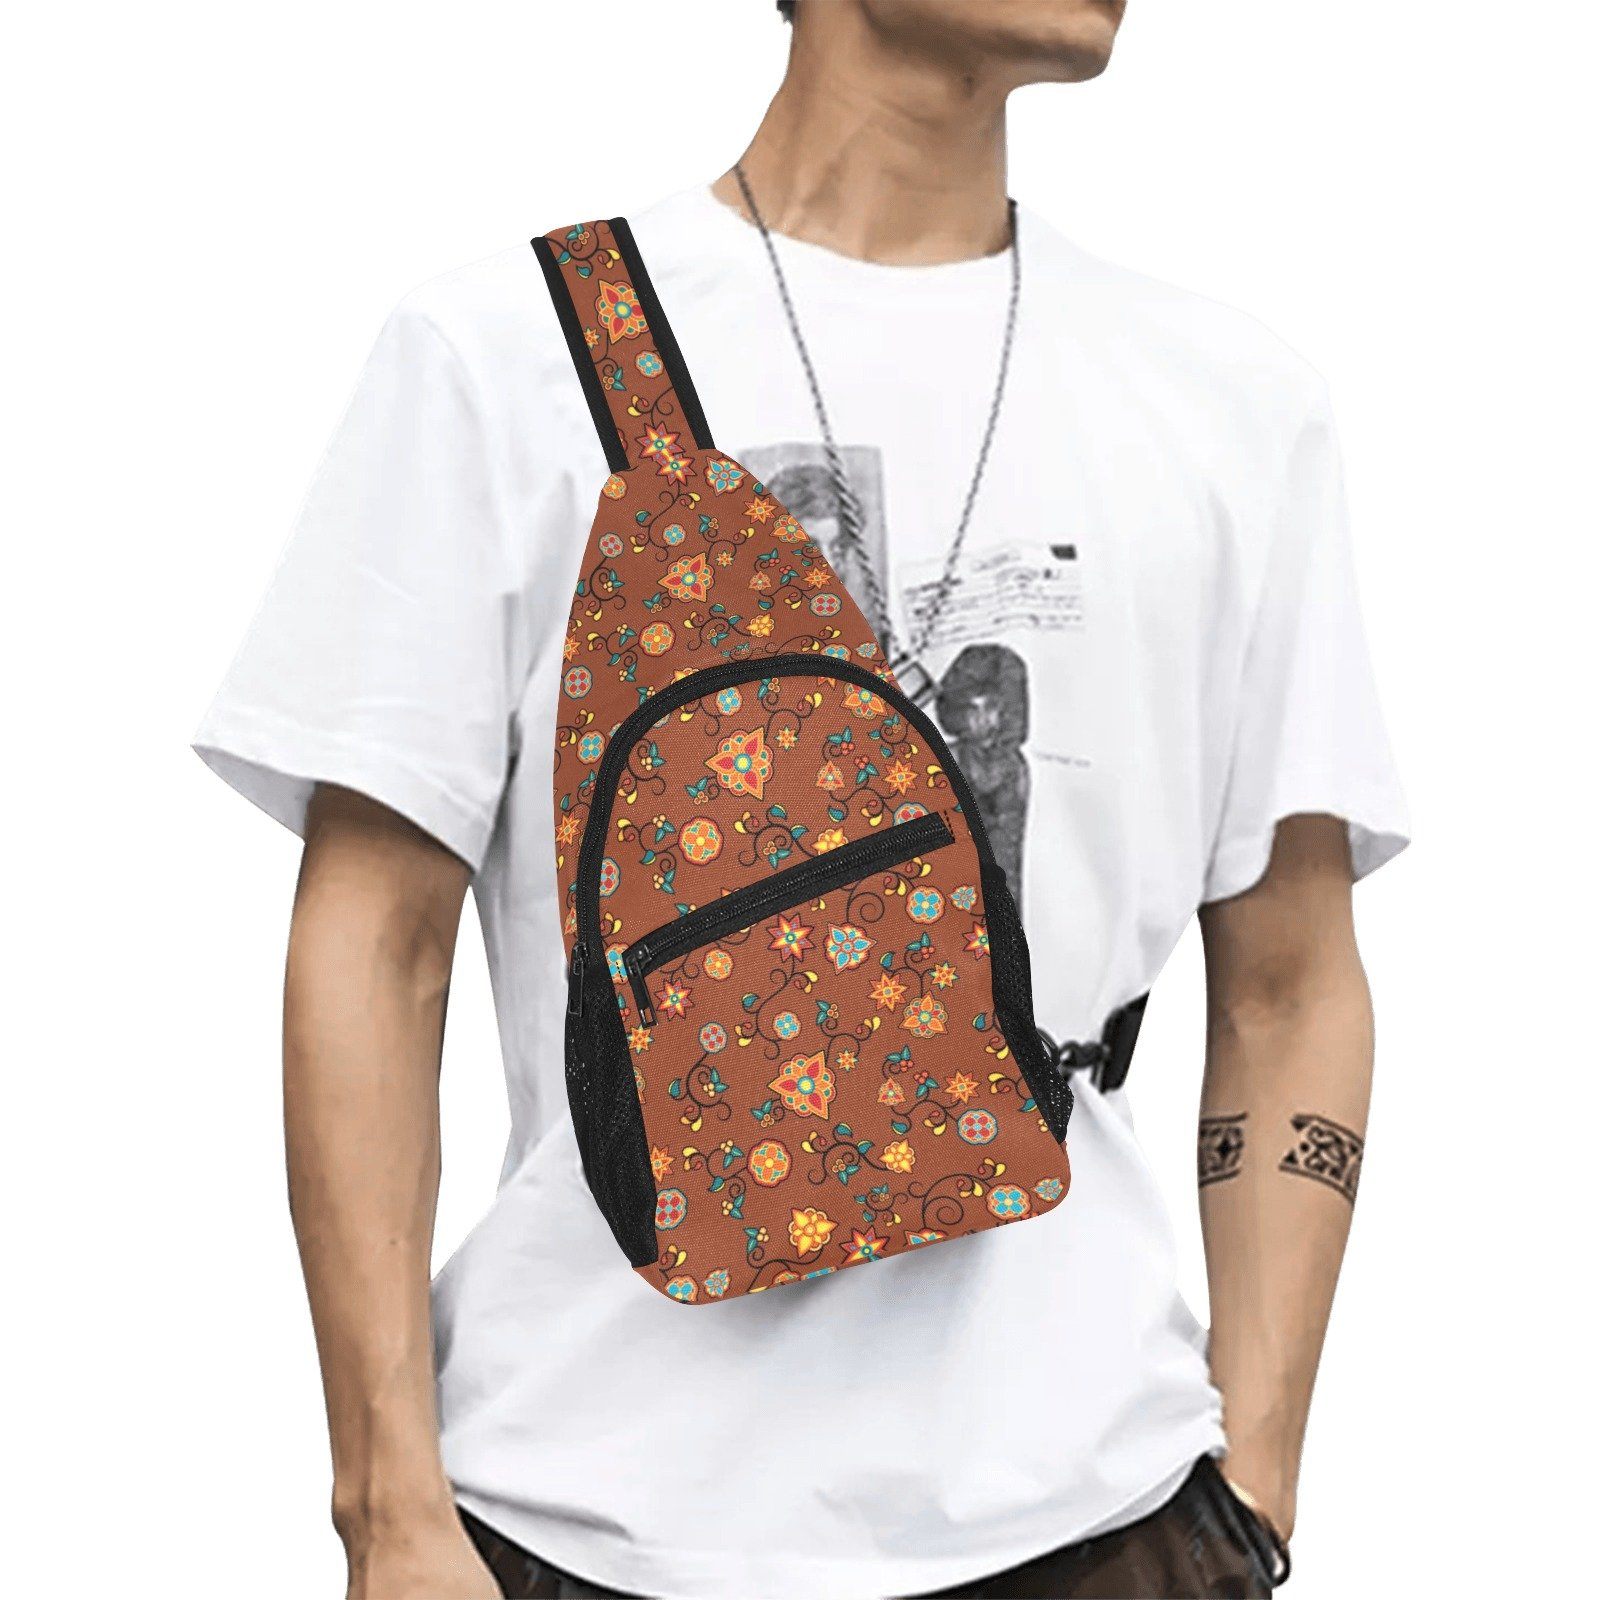 Fire Bloom Shade All Over Print Chest Bag (Model 1719) All Over Print Chest Bag (1719) e-joyer 